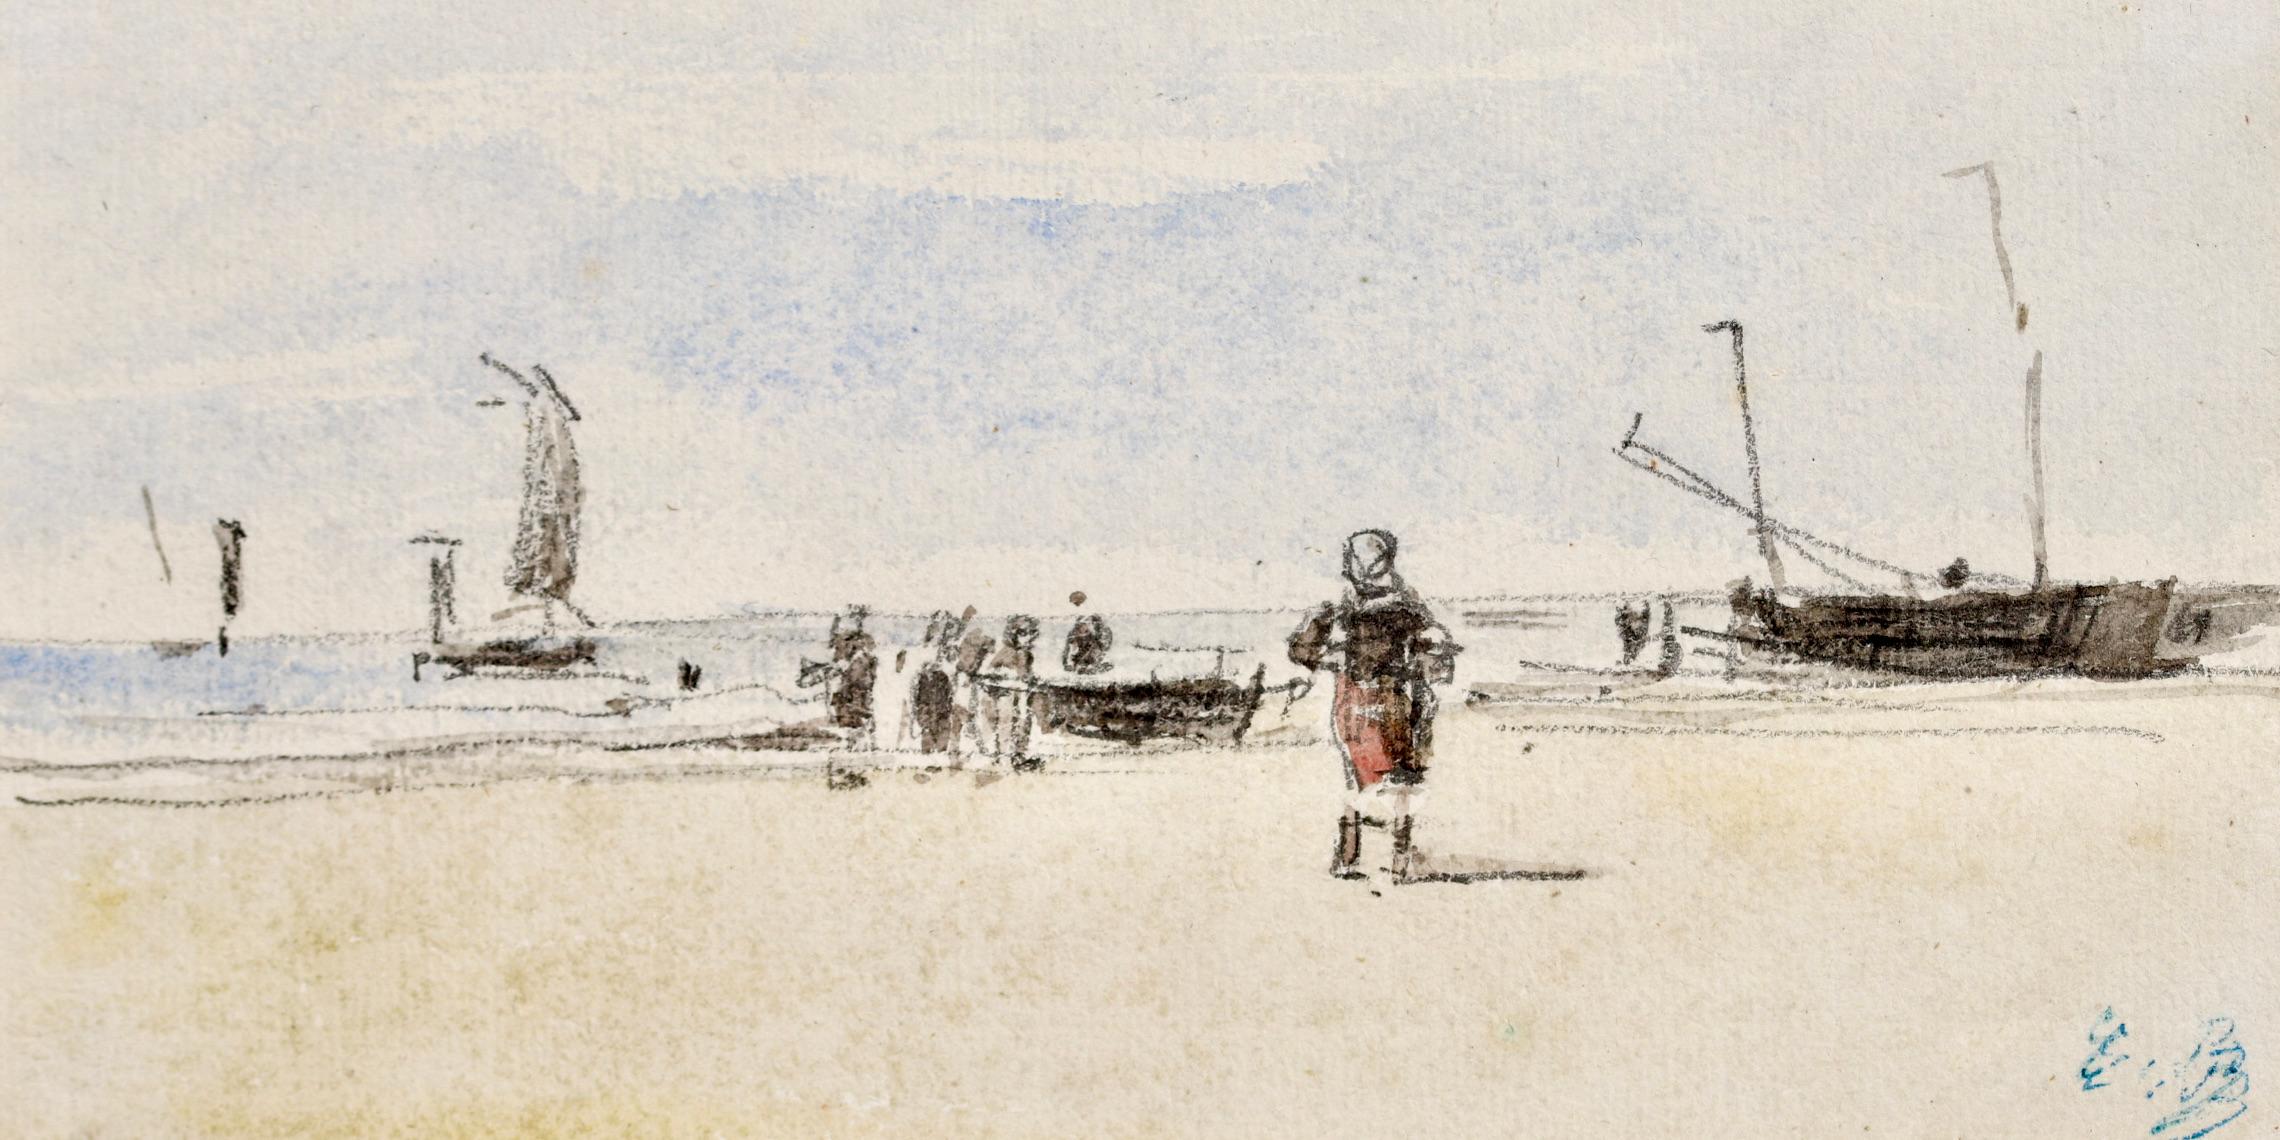 Figures on a beach - Impressionist Landscape Watercolor by Eugene Boudin